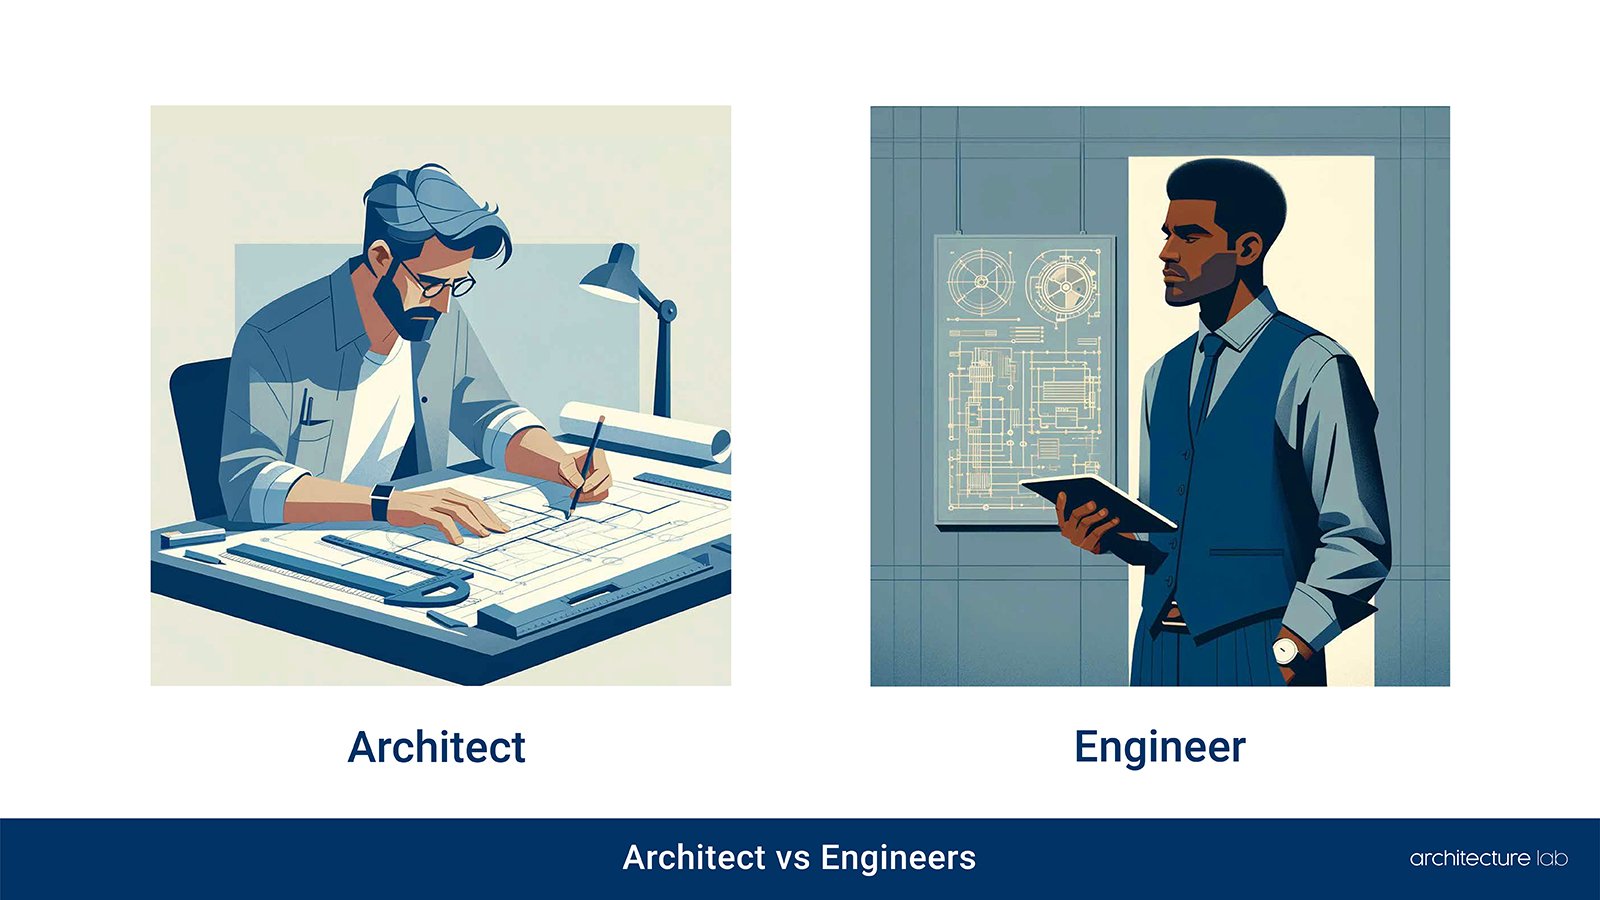 Architects vs. Engineers: differences, similarities, duties, salaries, and education